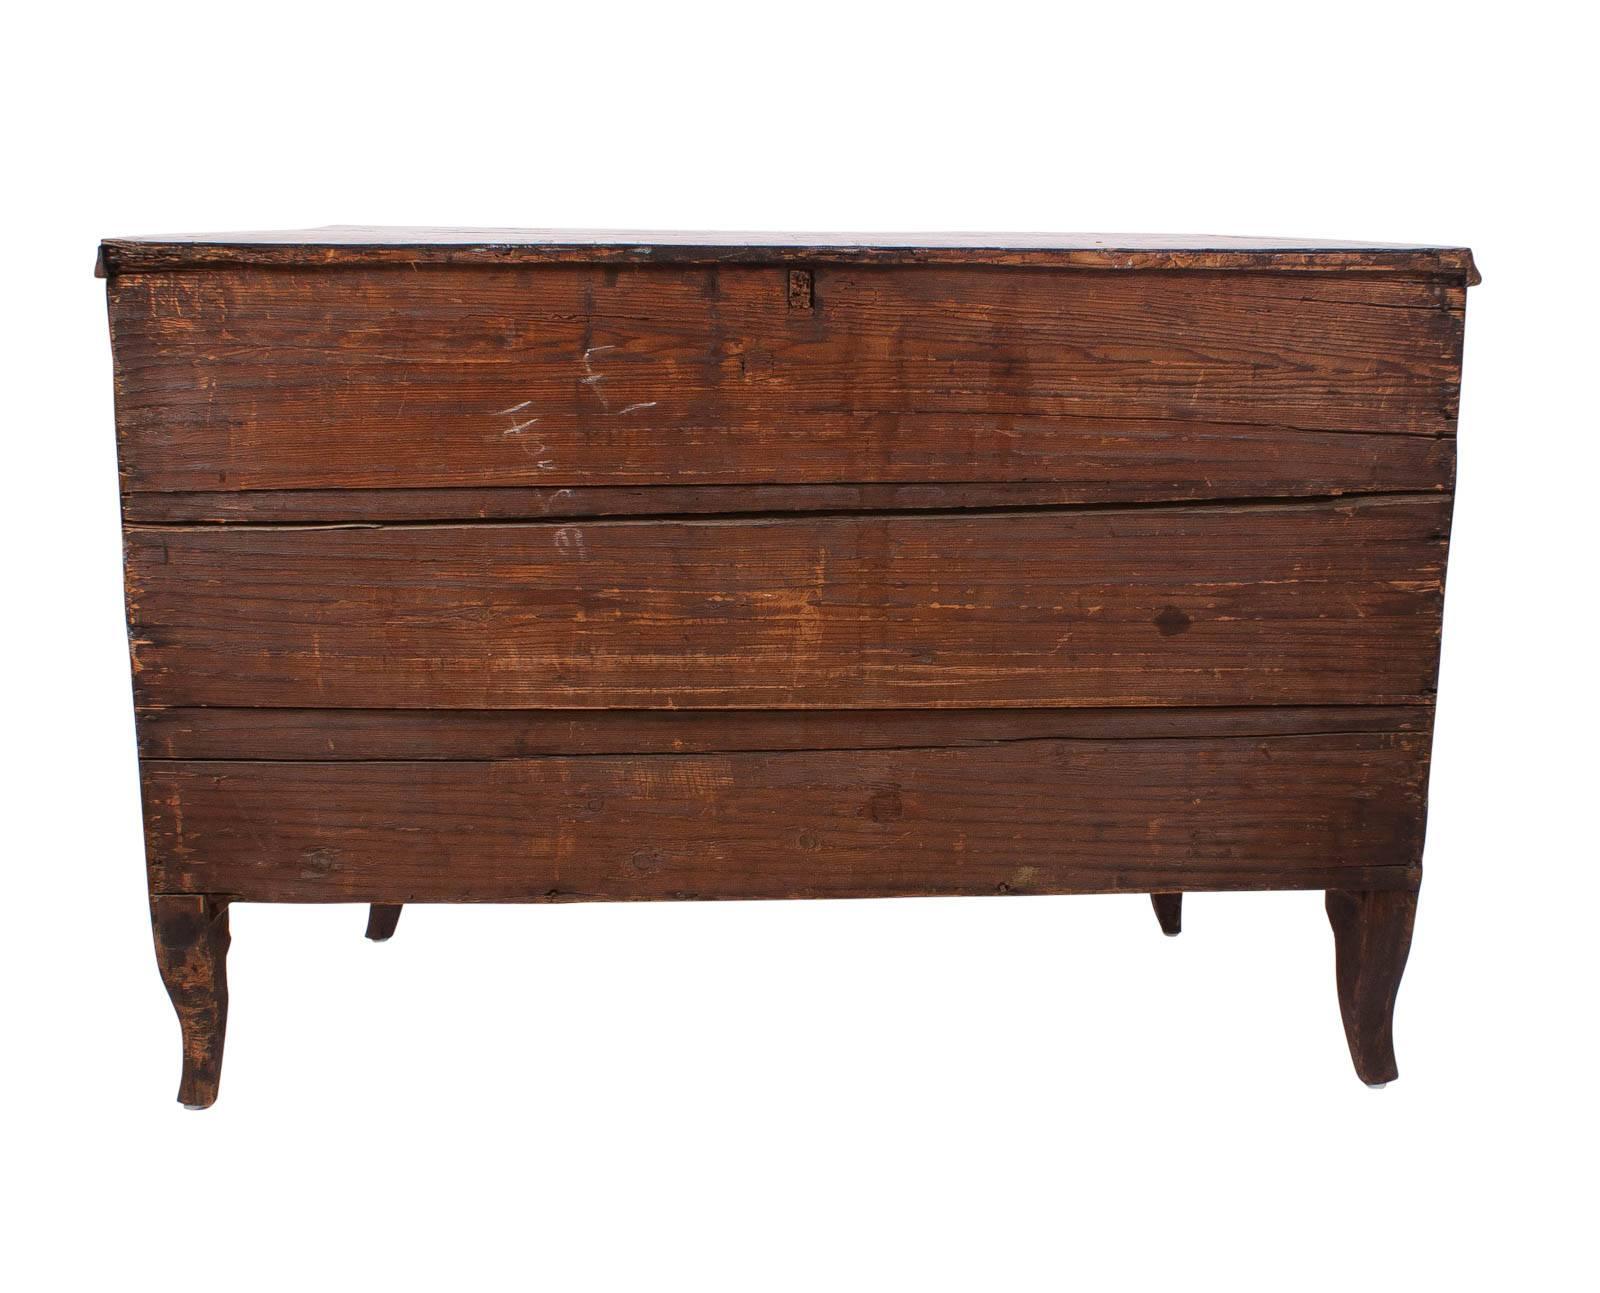 Late 18th Century Venetian Olivewood Commode, Italy, circa 1770